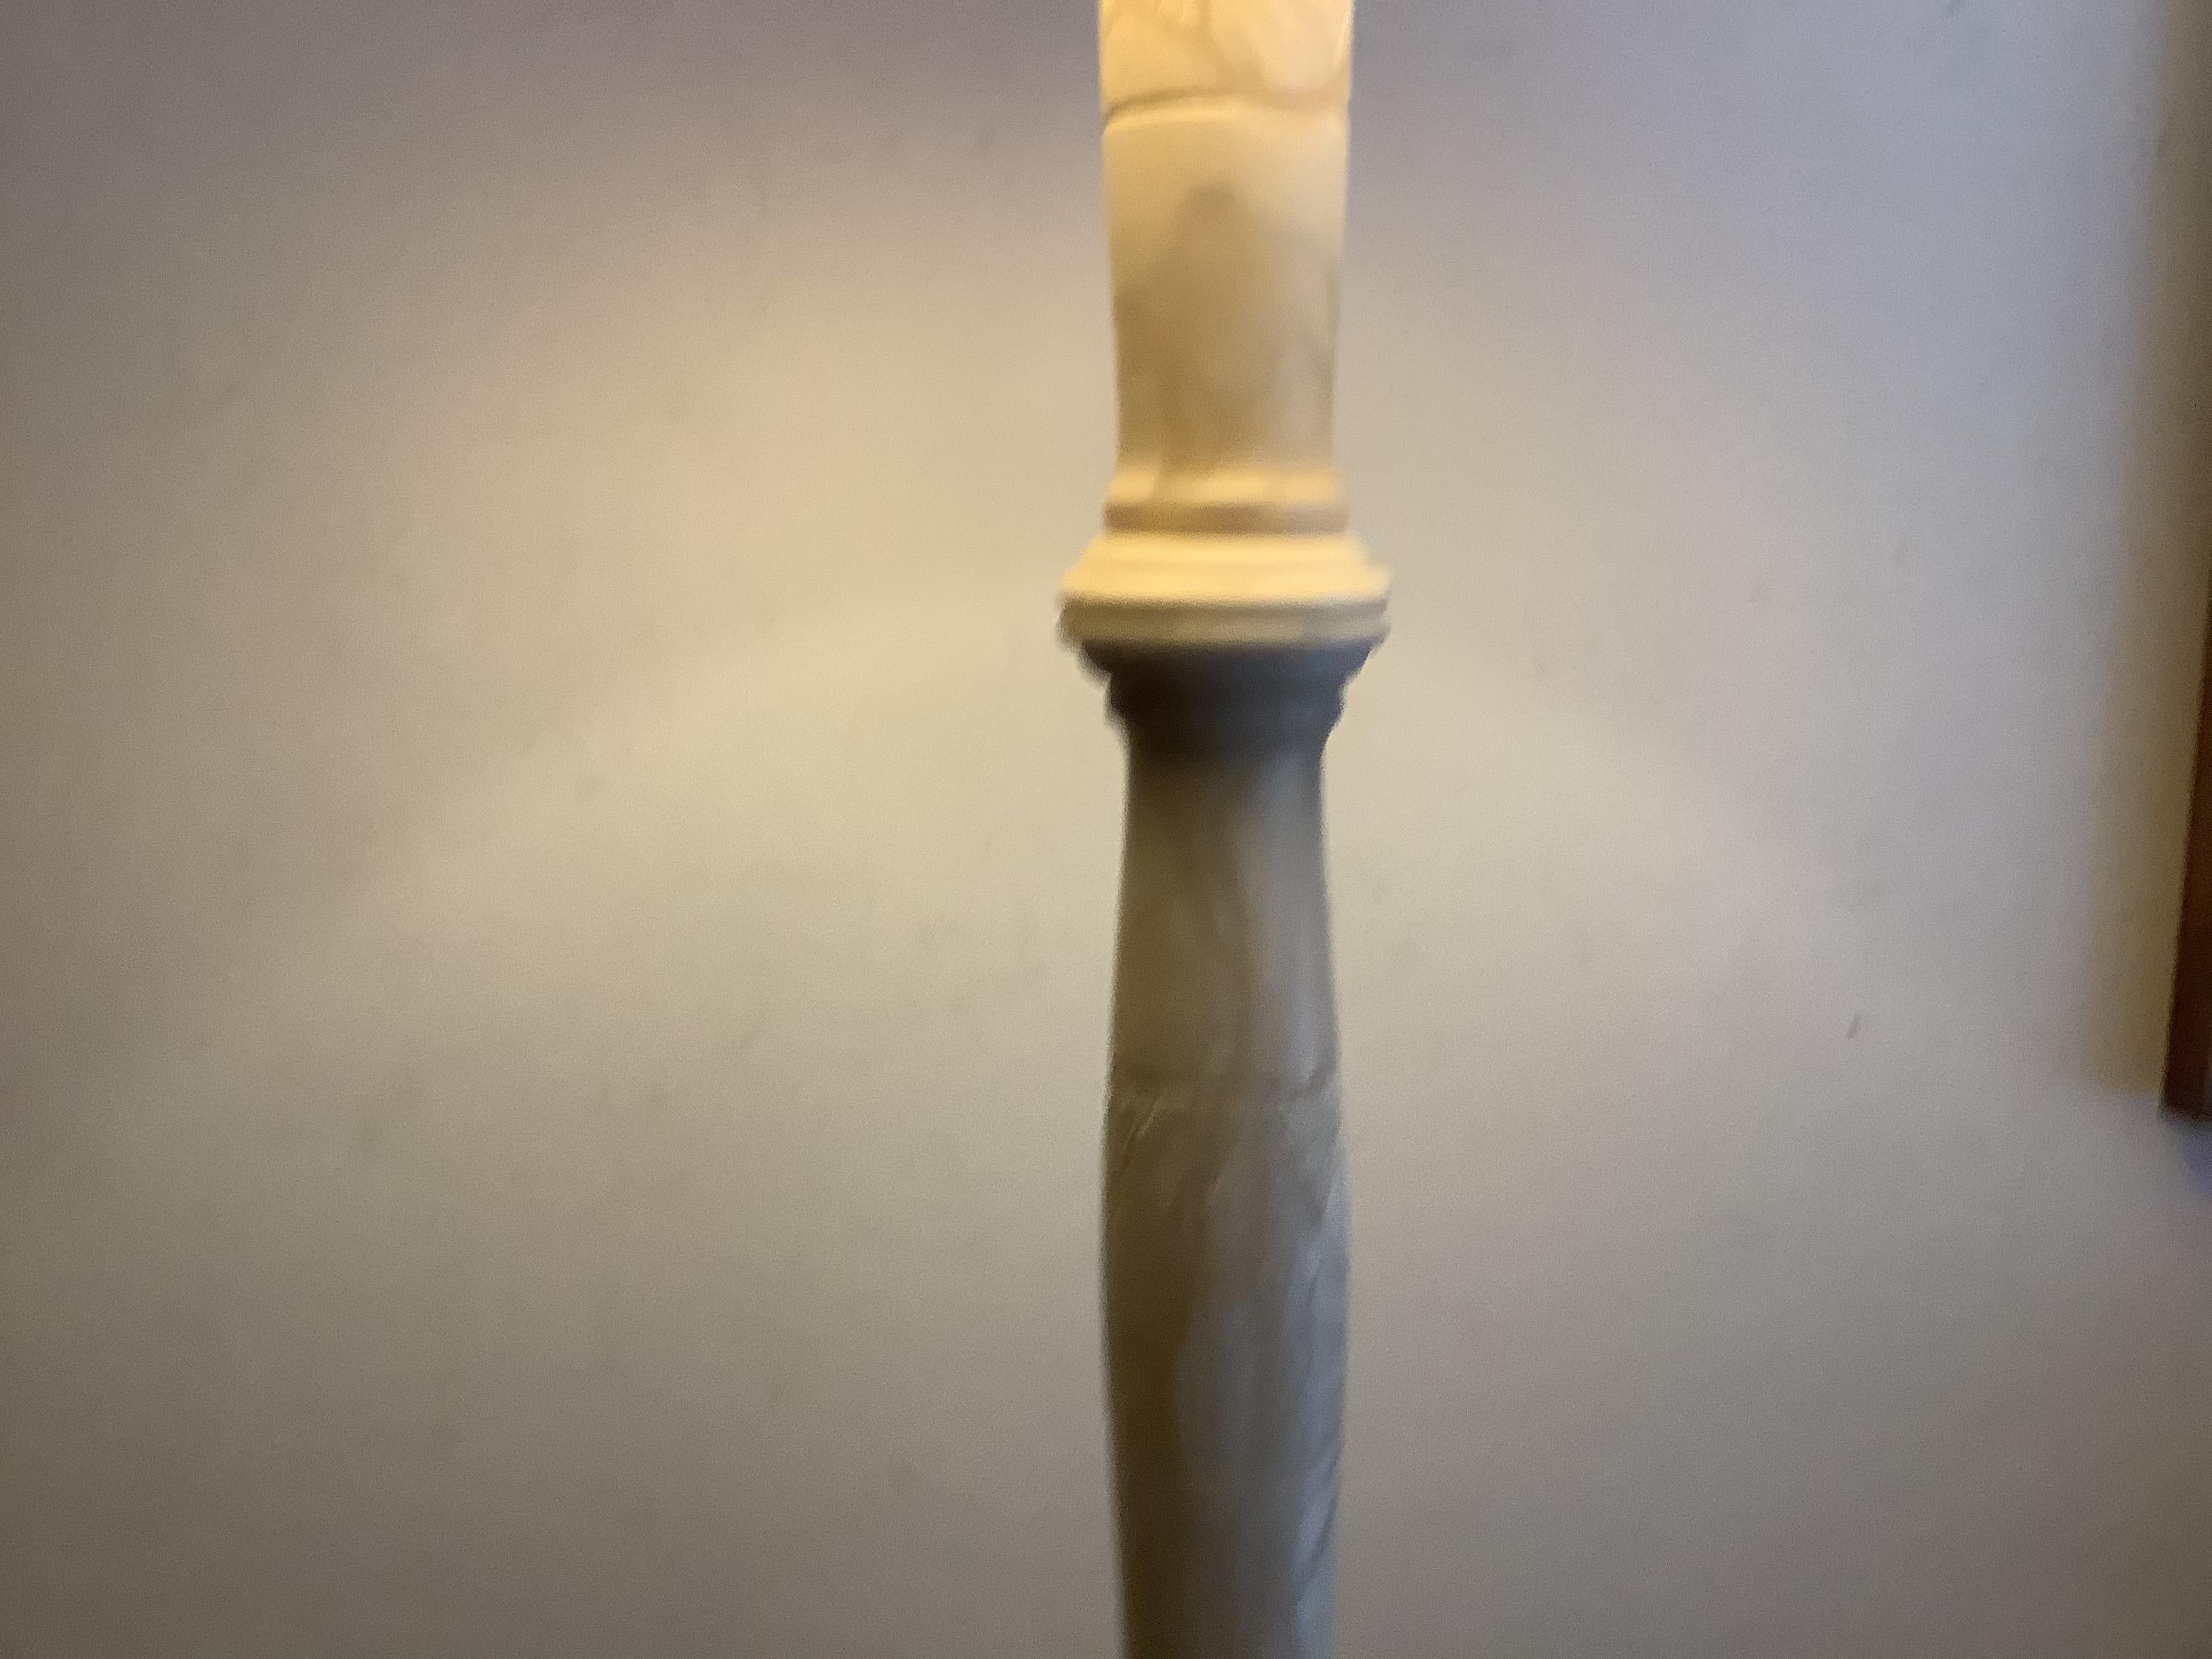 Stunning alabaster standing lamp with simple cravings on the stem.
 